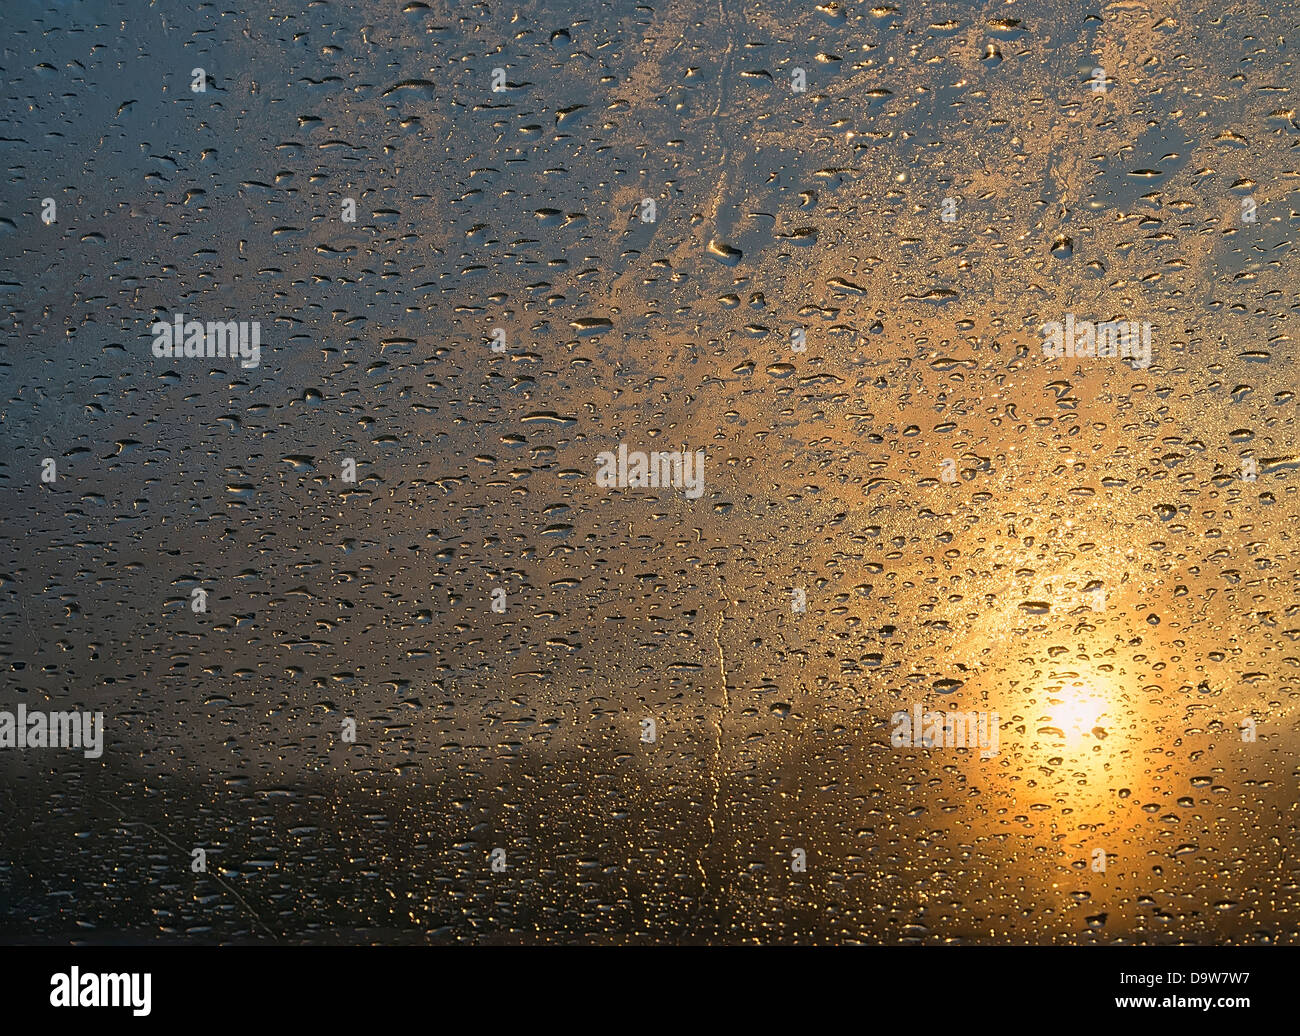 Drops of water on the glass at dawn Stock Photo